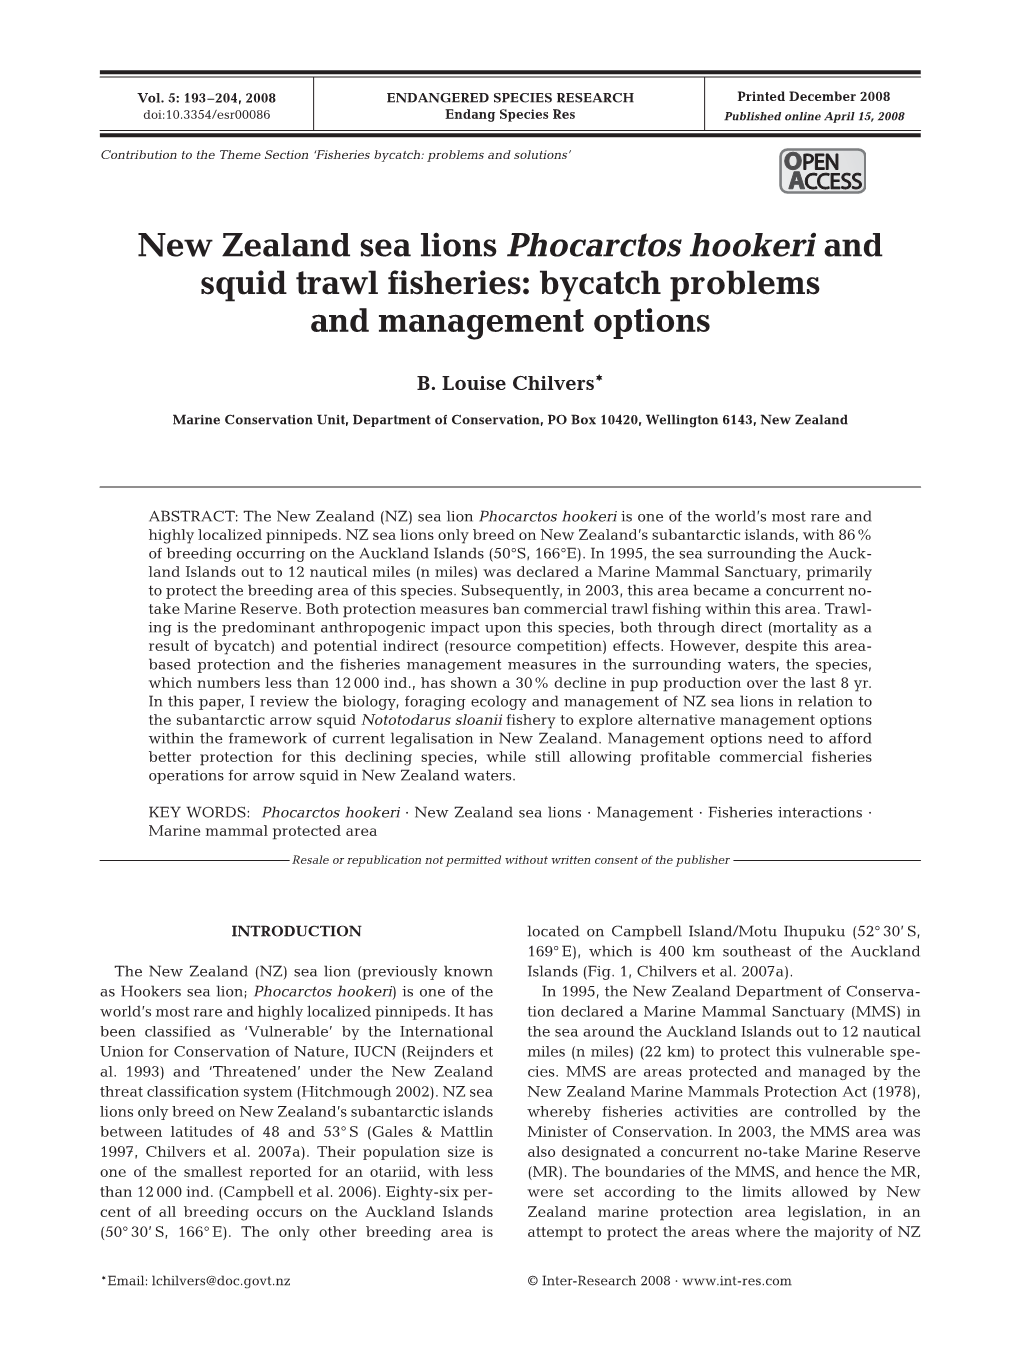 New Zealand Sea Lions Phocarctos Hookeri and Squid Trawl Fisheries: Bycatch Problems and Management Options